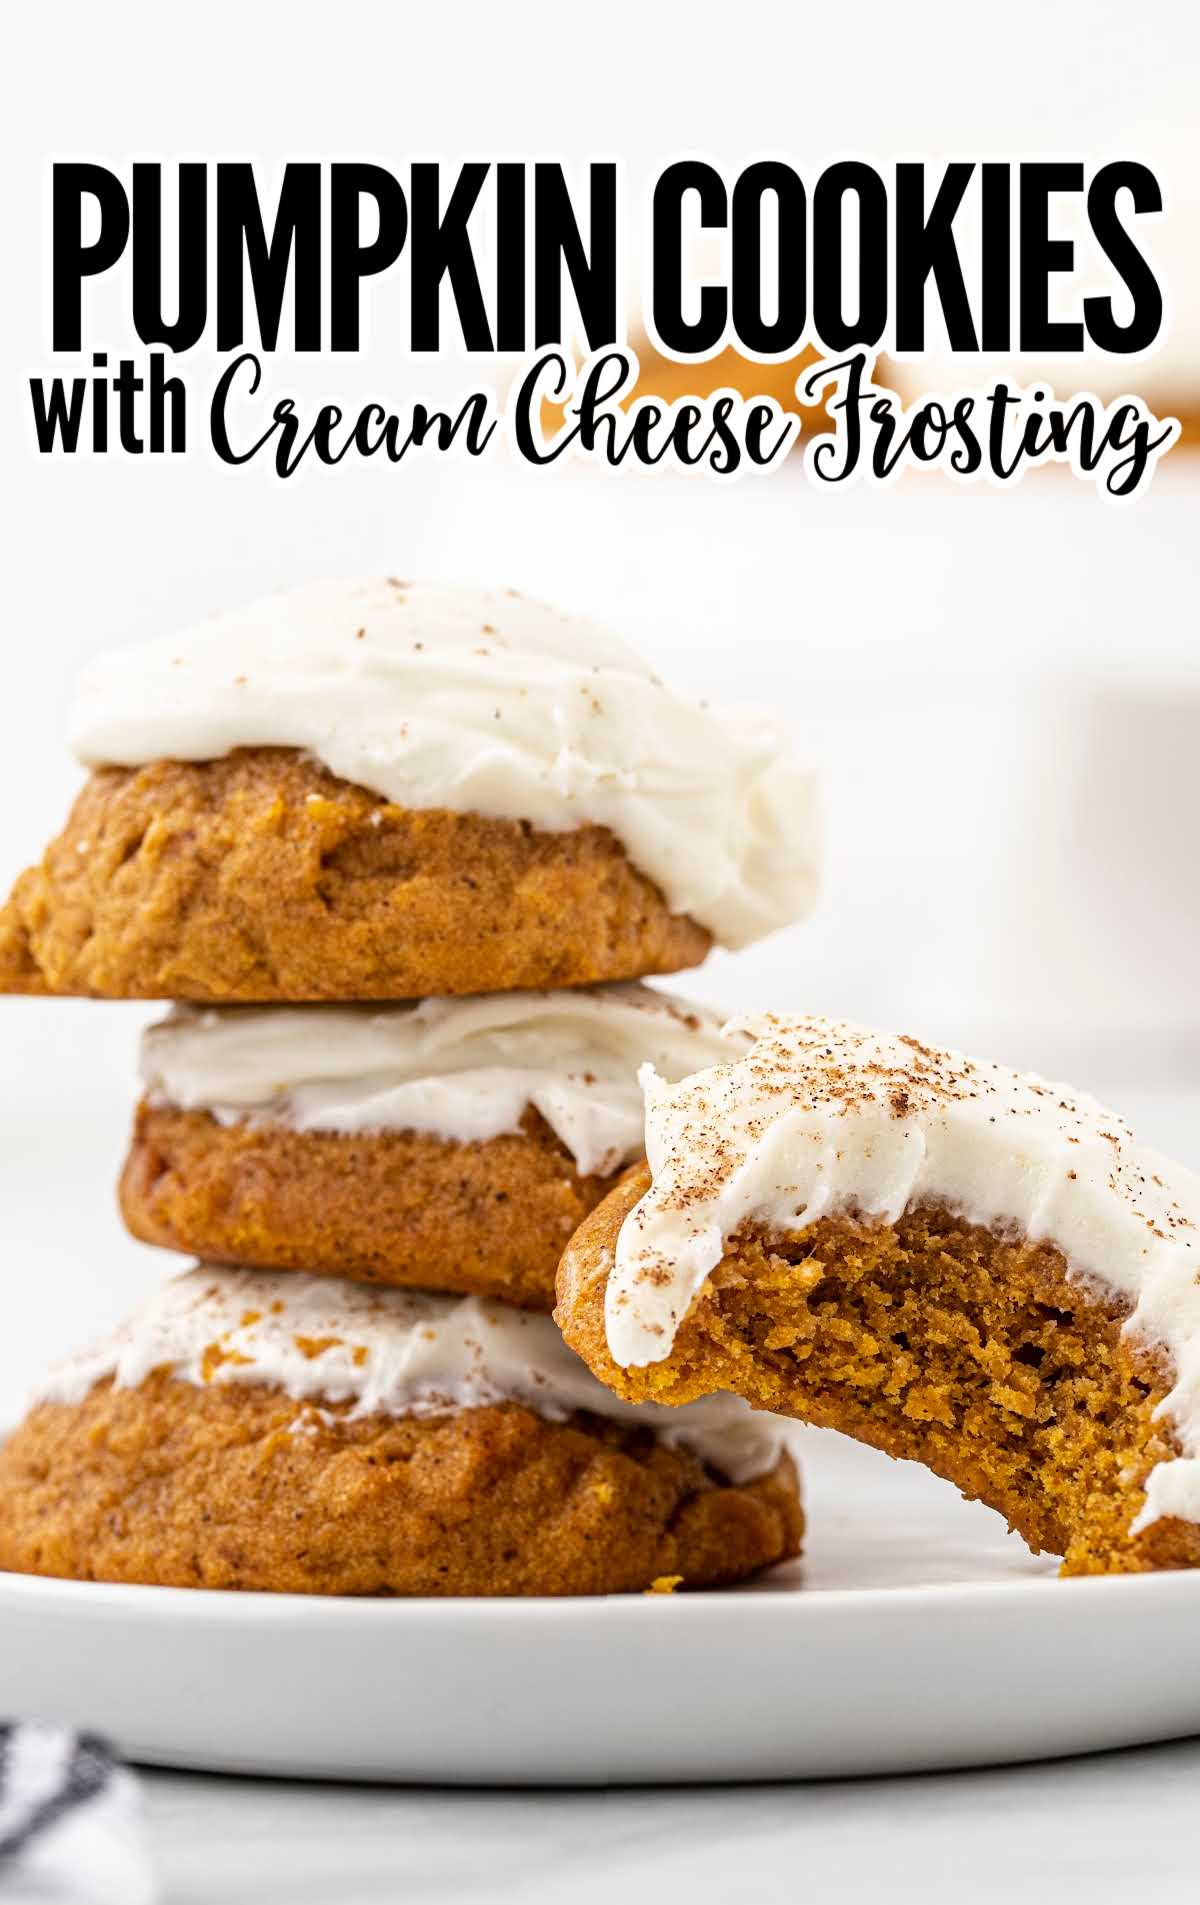 Pumpkin Cookies with Cream Cheese Frosting - The Best Blog Recipes